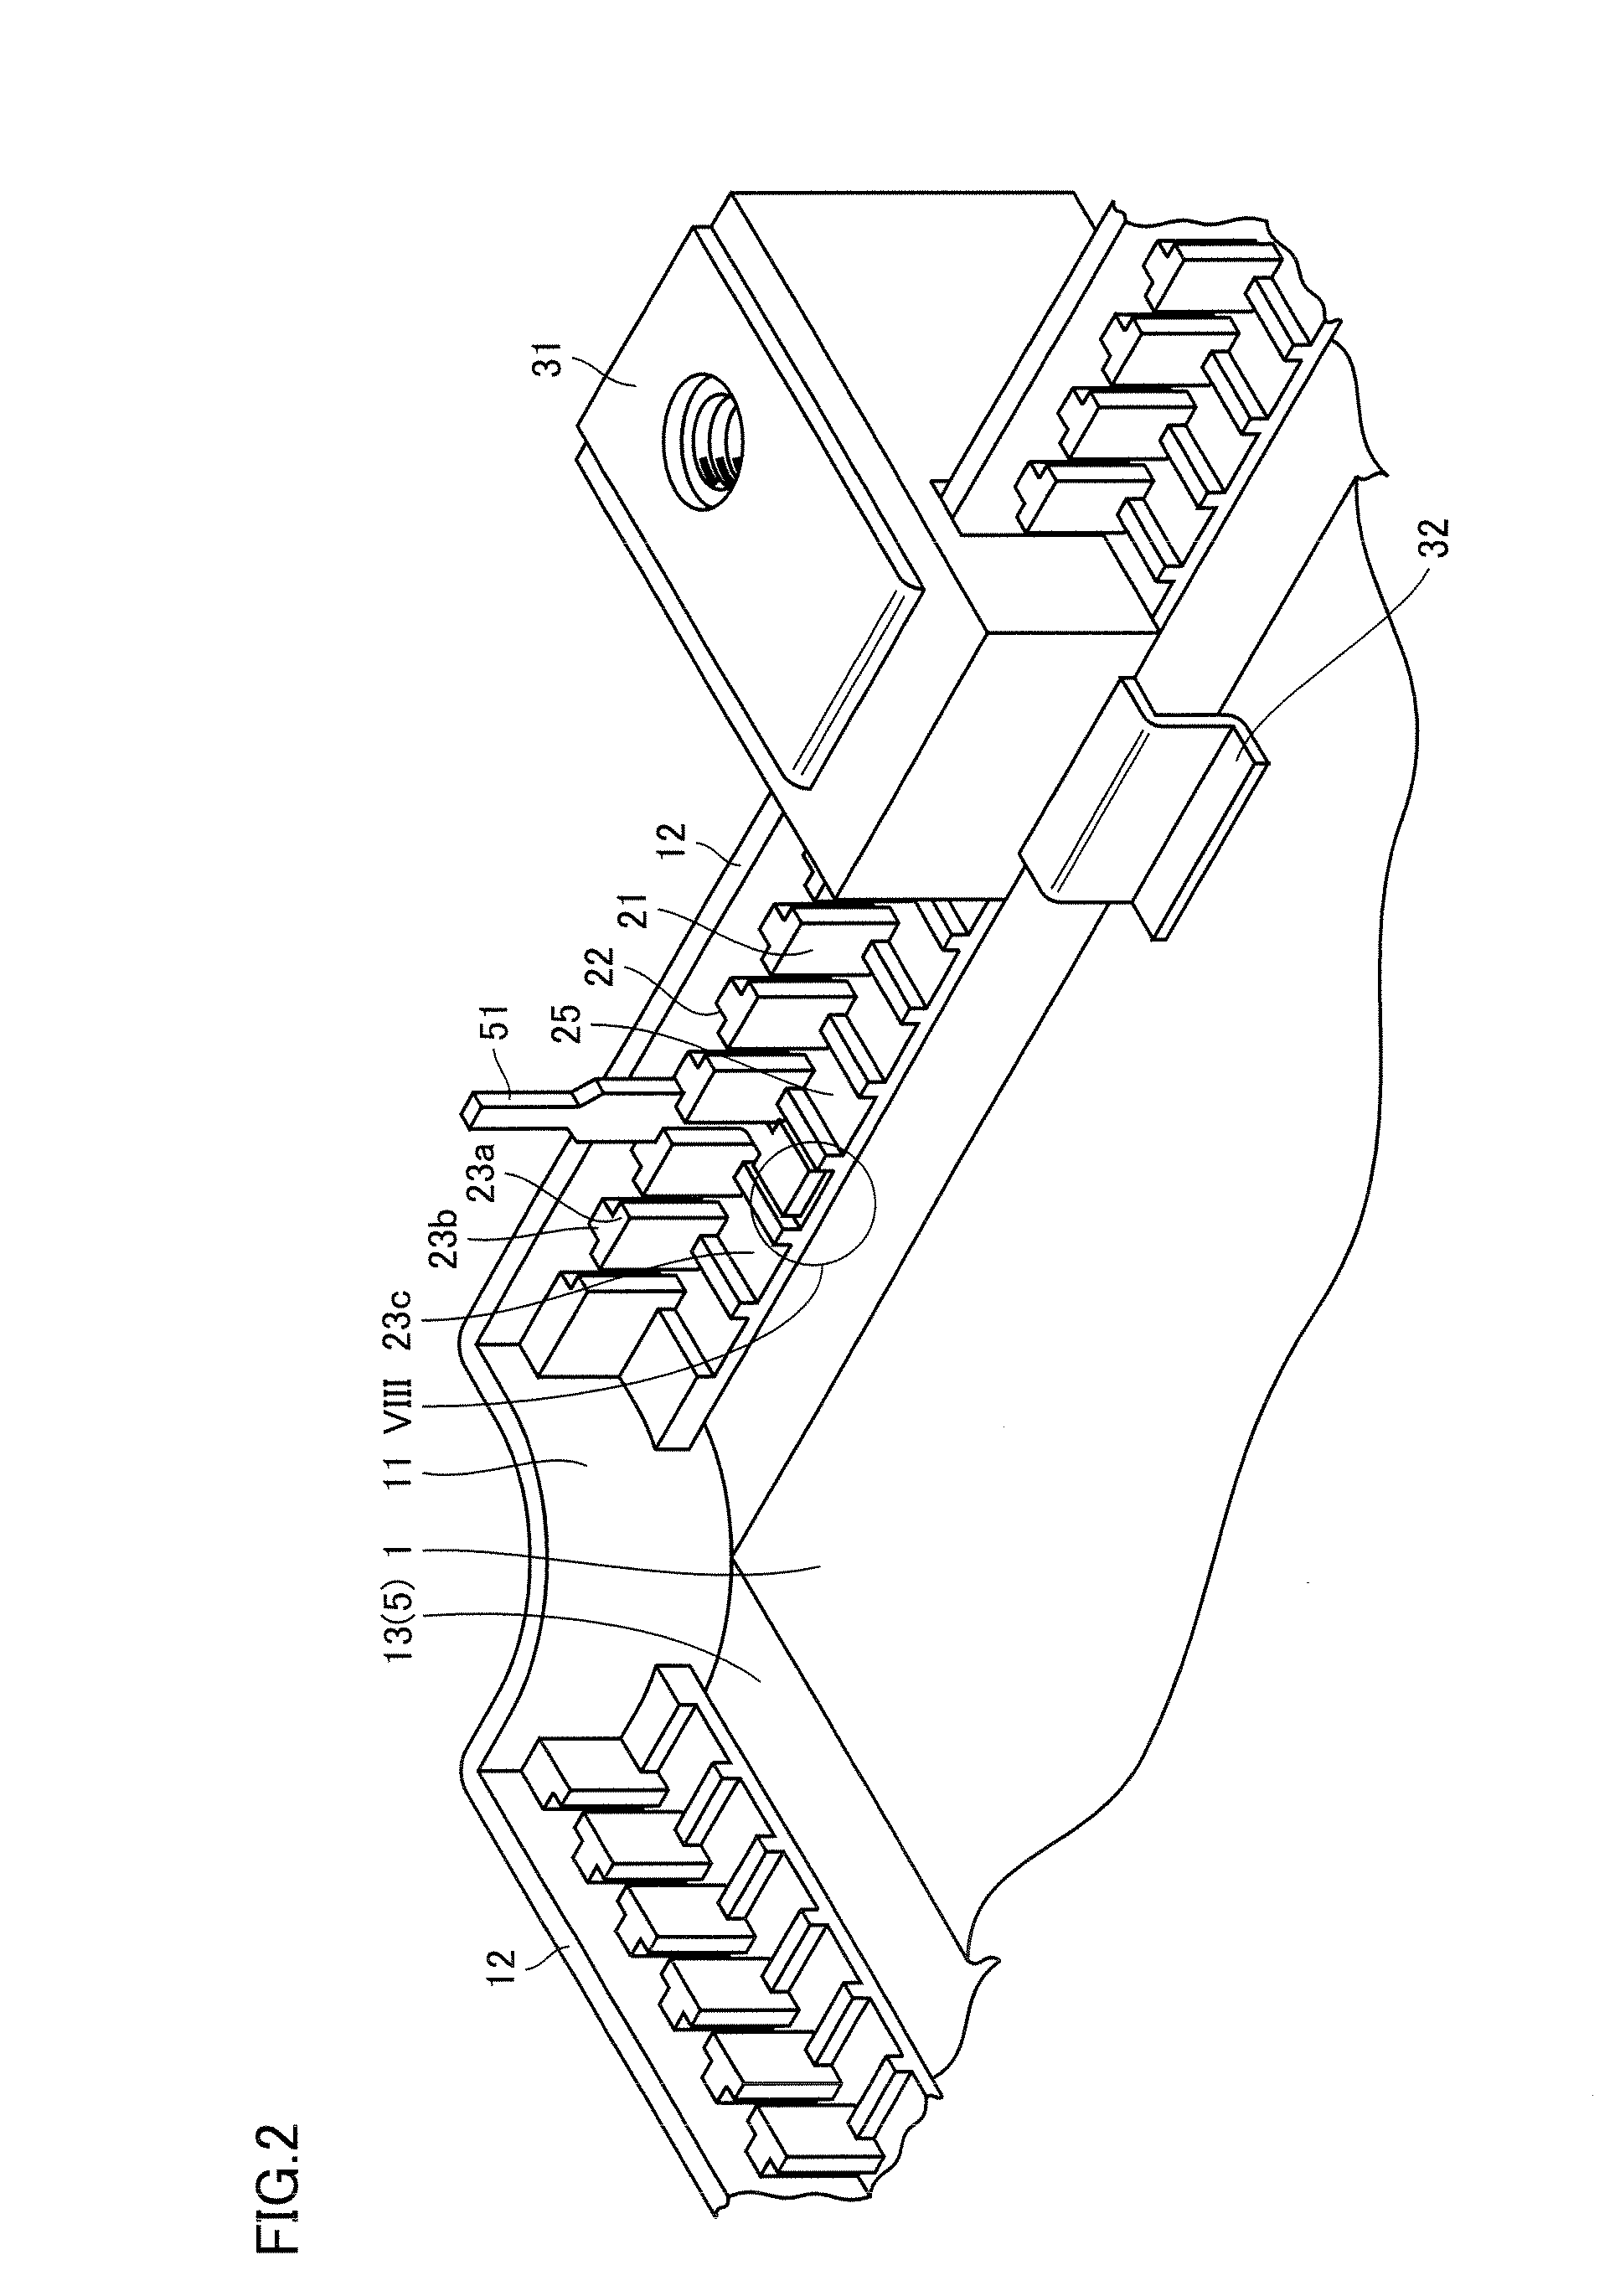 Semiconductor device having terminals